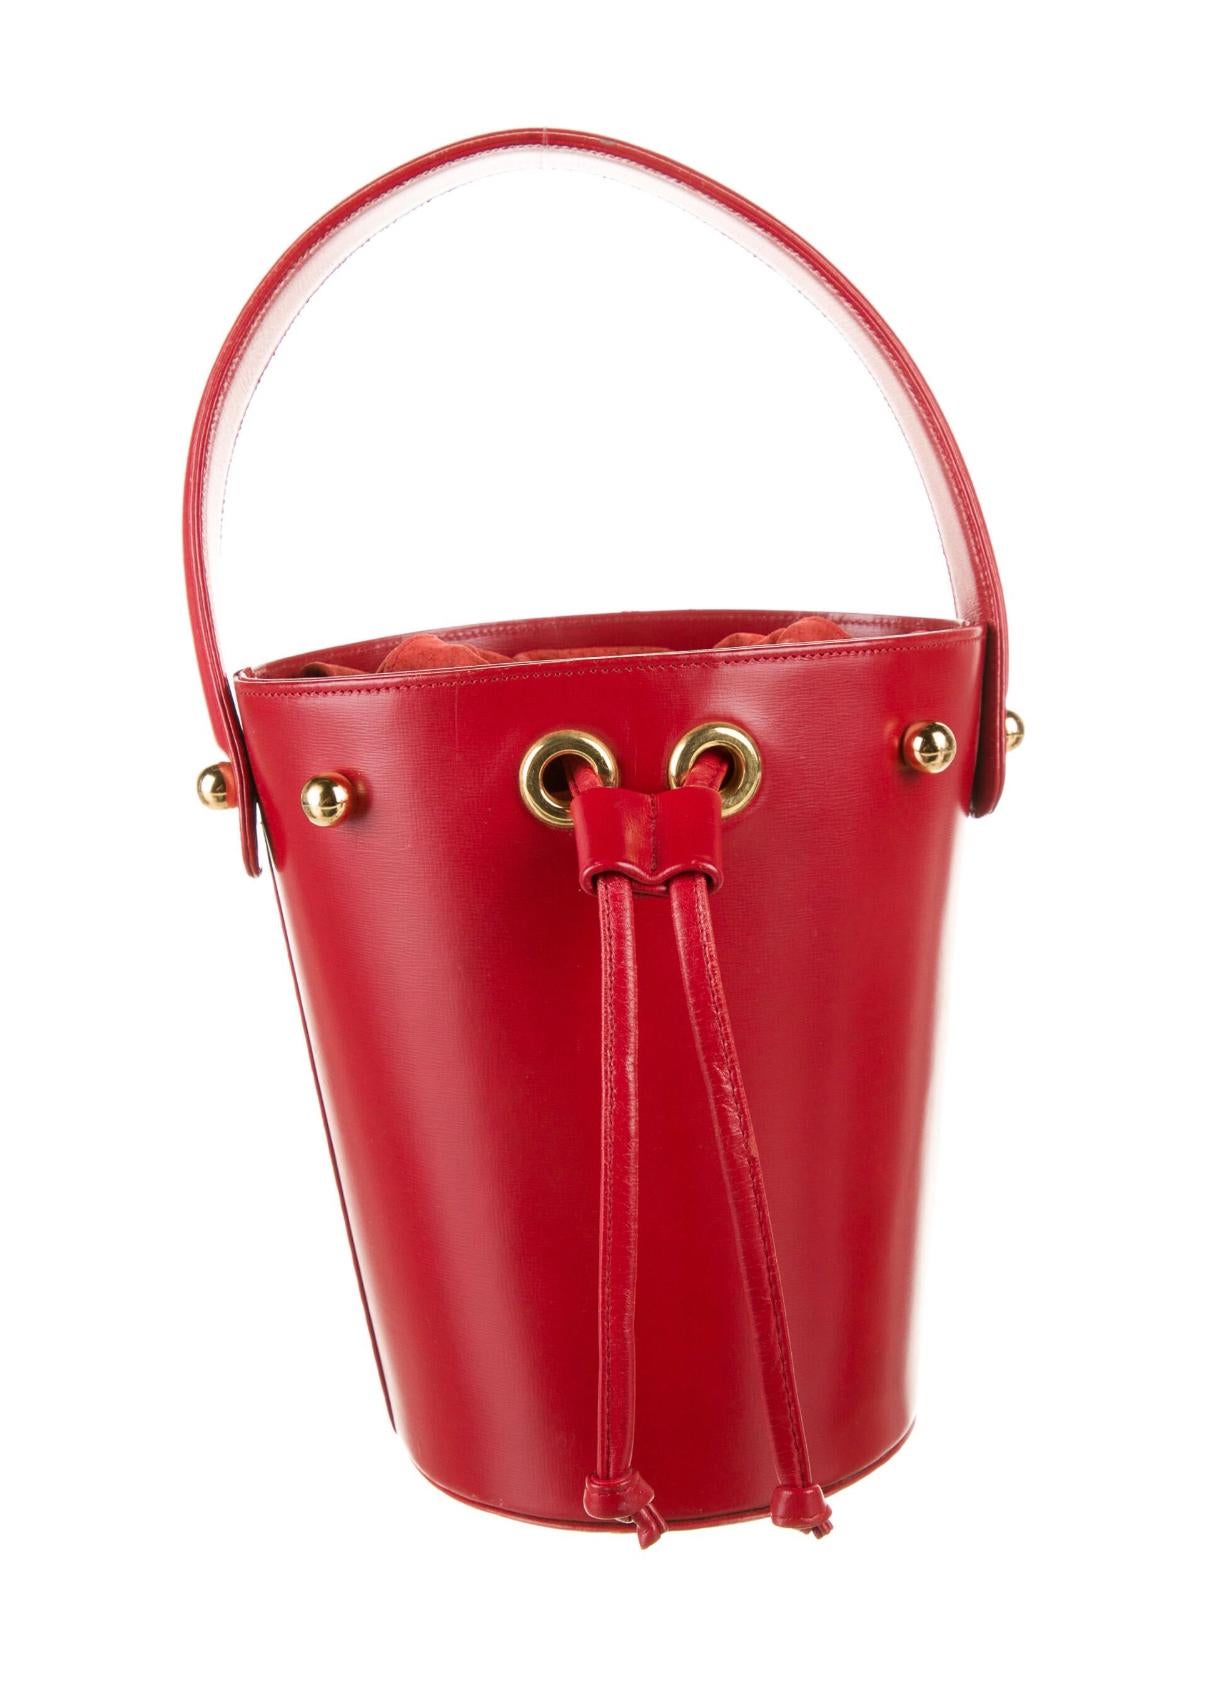 Paloma Picasso red leather bucket bag. Condition: Very good.